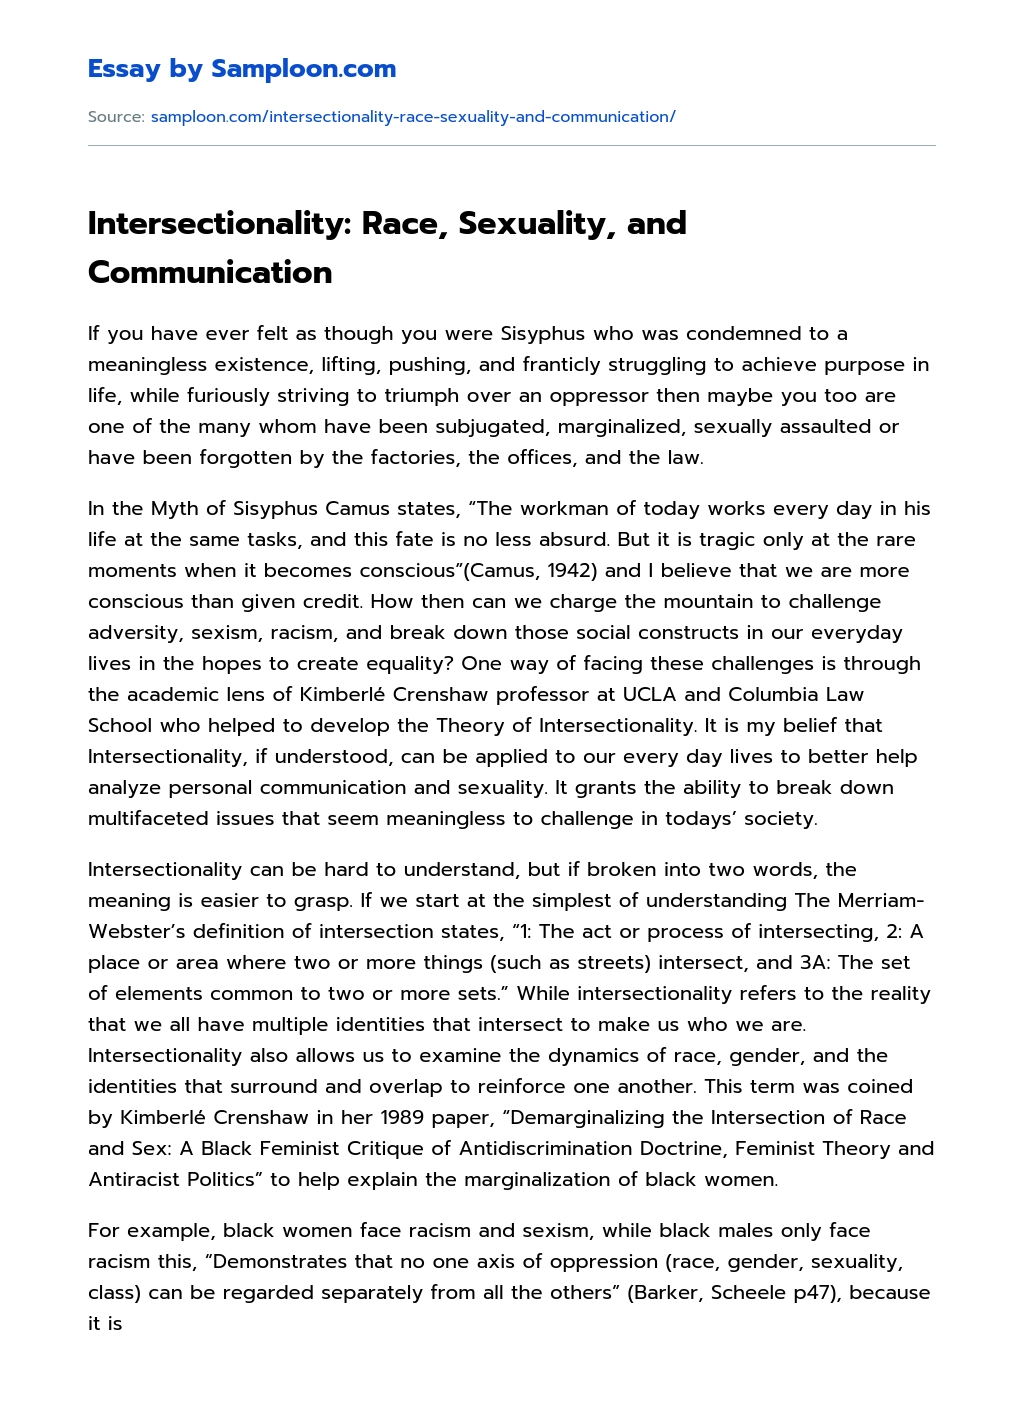 Intersectionality: Race, Sexuality, and Communication Summary essay